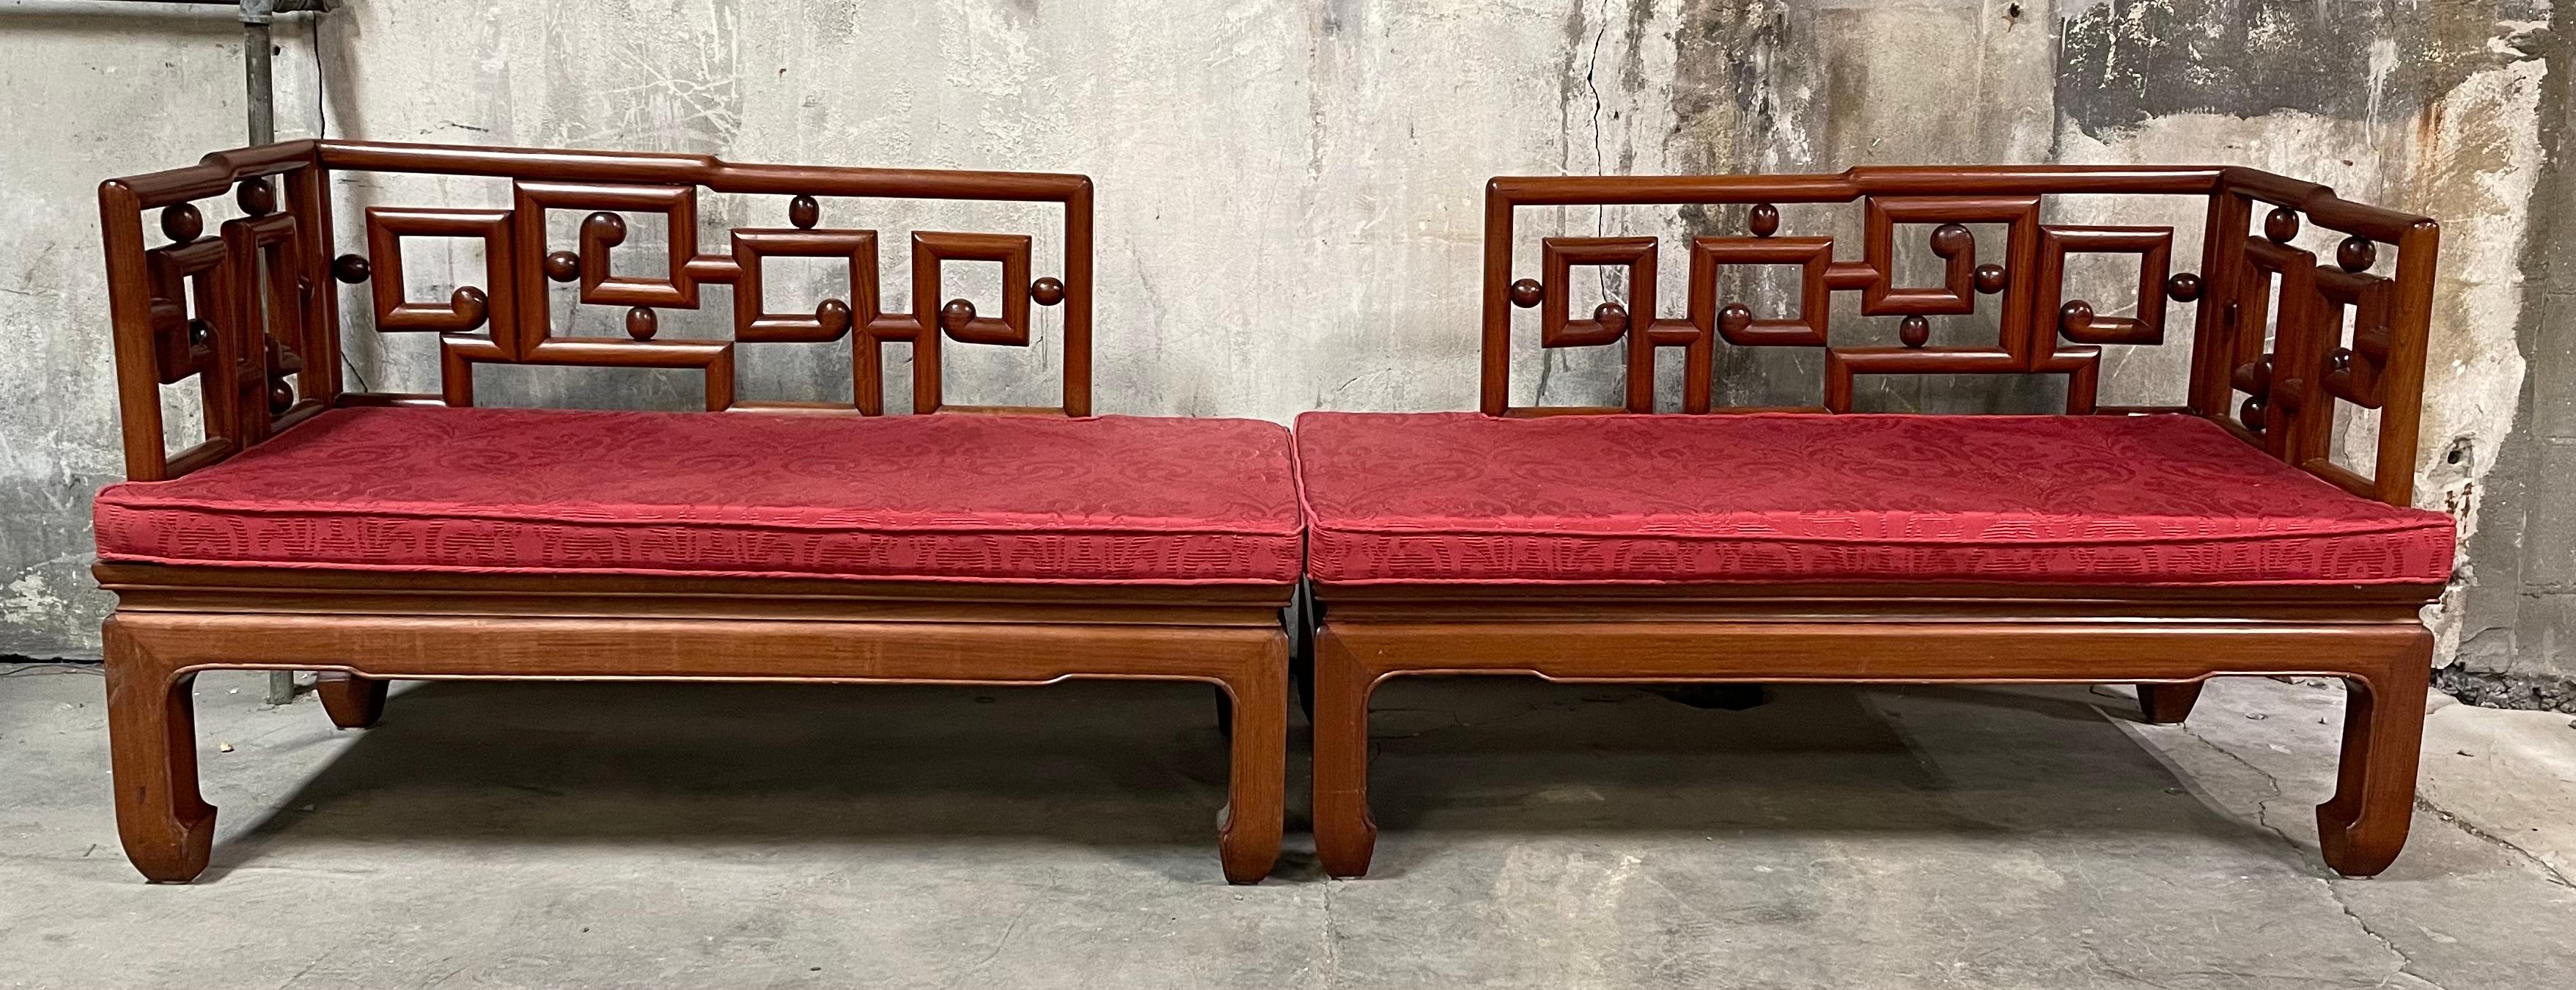 Phenomenal mid century George Zee Teak sectional. Superb detailing in fretwork with classic Ming legs. Versatile in placement. Solid and heavy. From the estate of an executive with The Ford Foundation who purchased it while on business in the